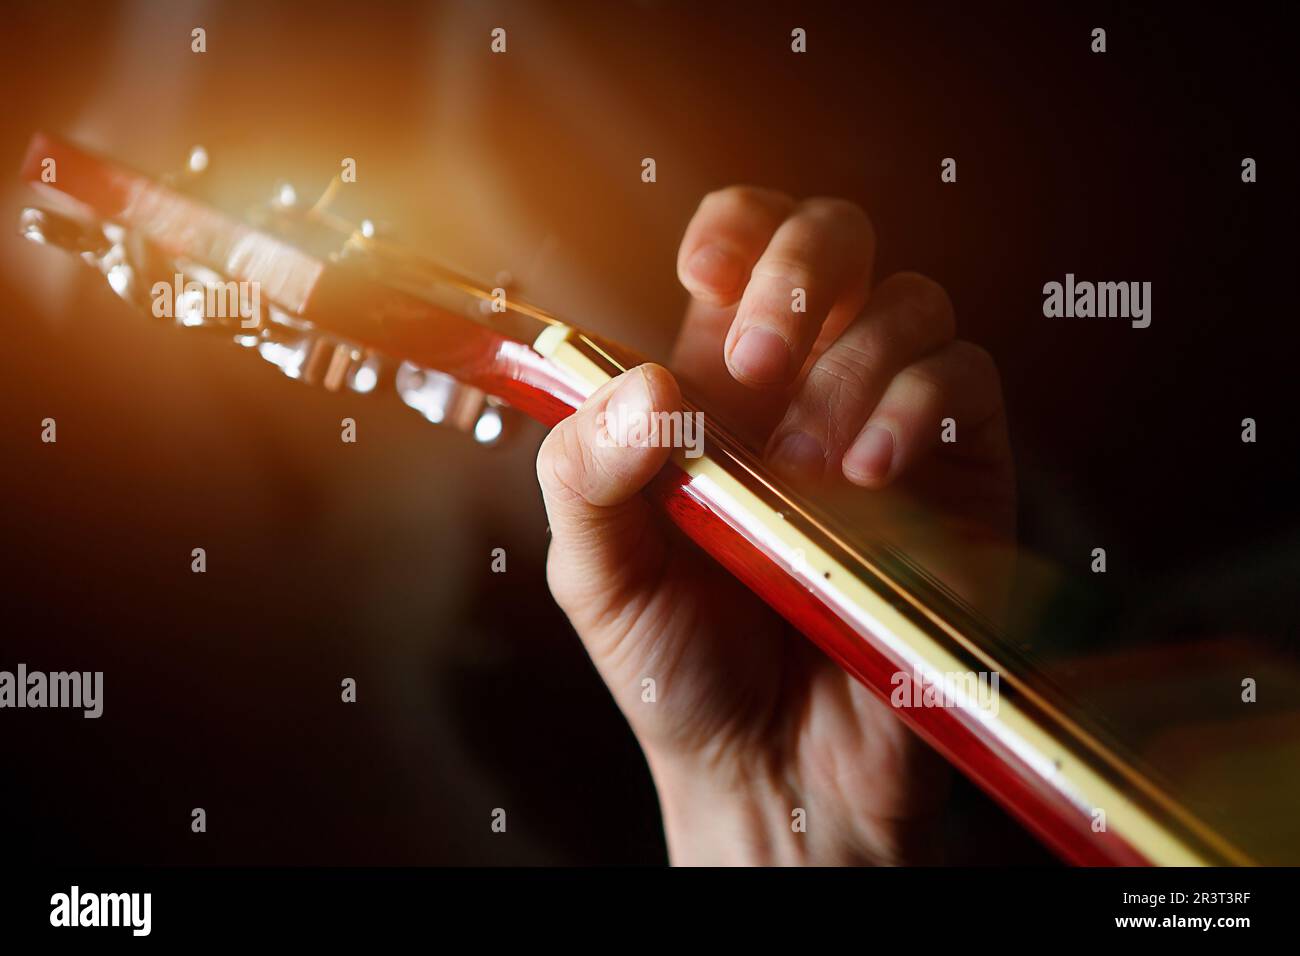 a mans hand on the fretboard of a guitar runs his fingers through the strings and clamps the chords instrumental music guitar 2R3T3RF